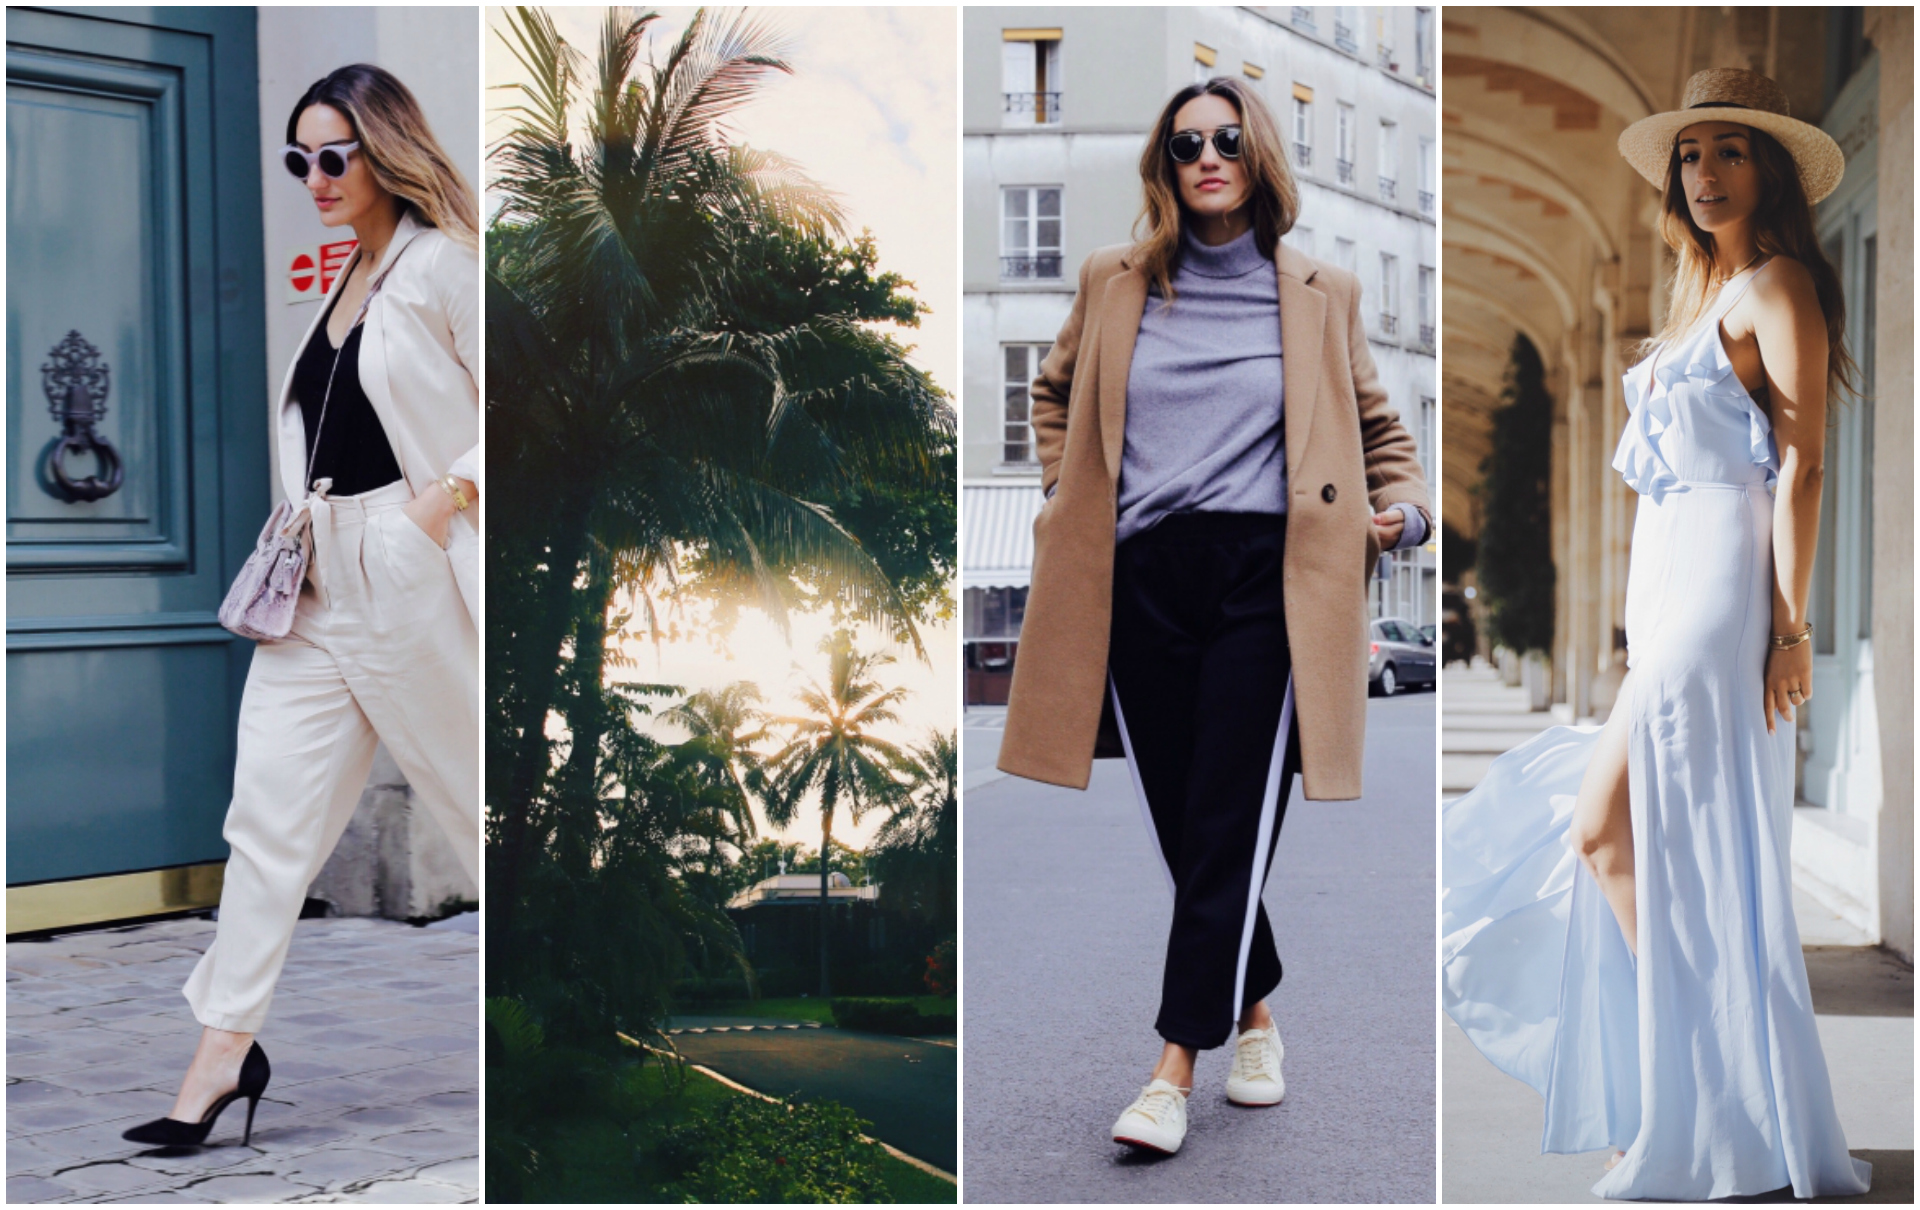 5 Bloggers: France | Love Daily Dose5 Bloggers: France | Love Daily Dose